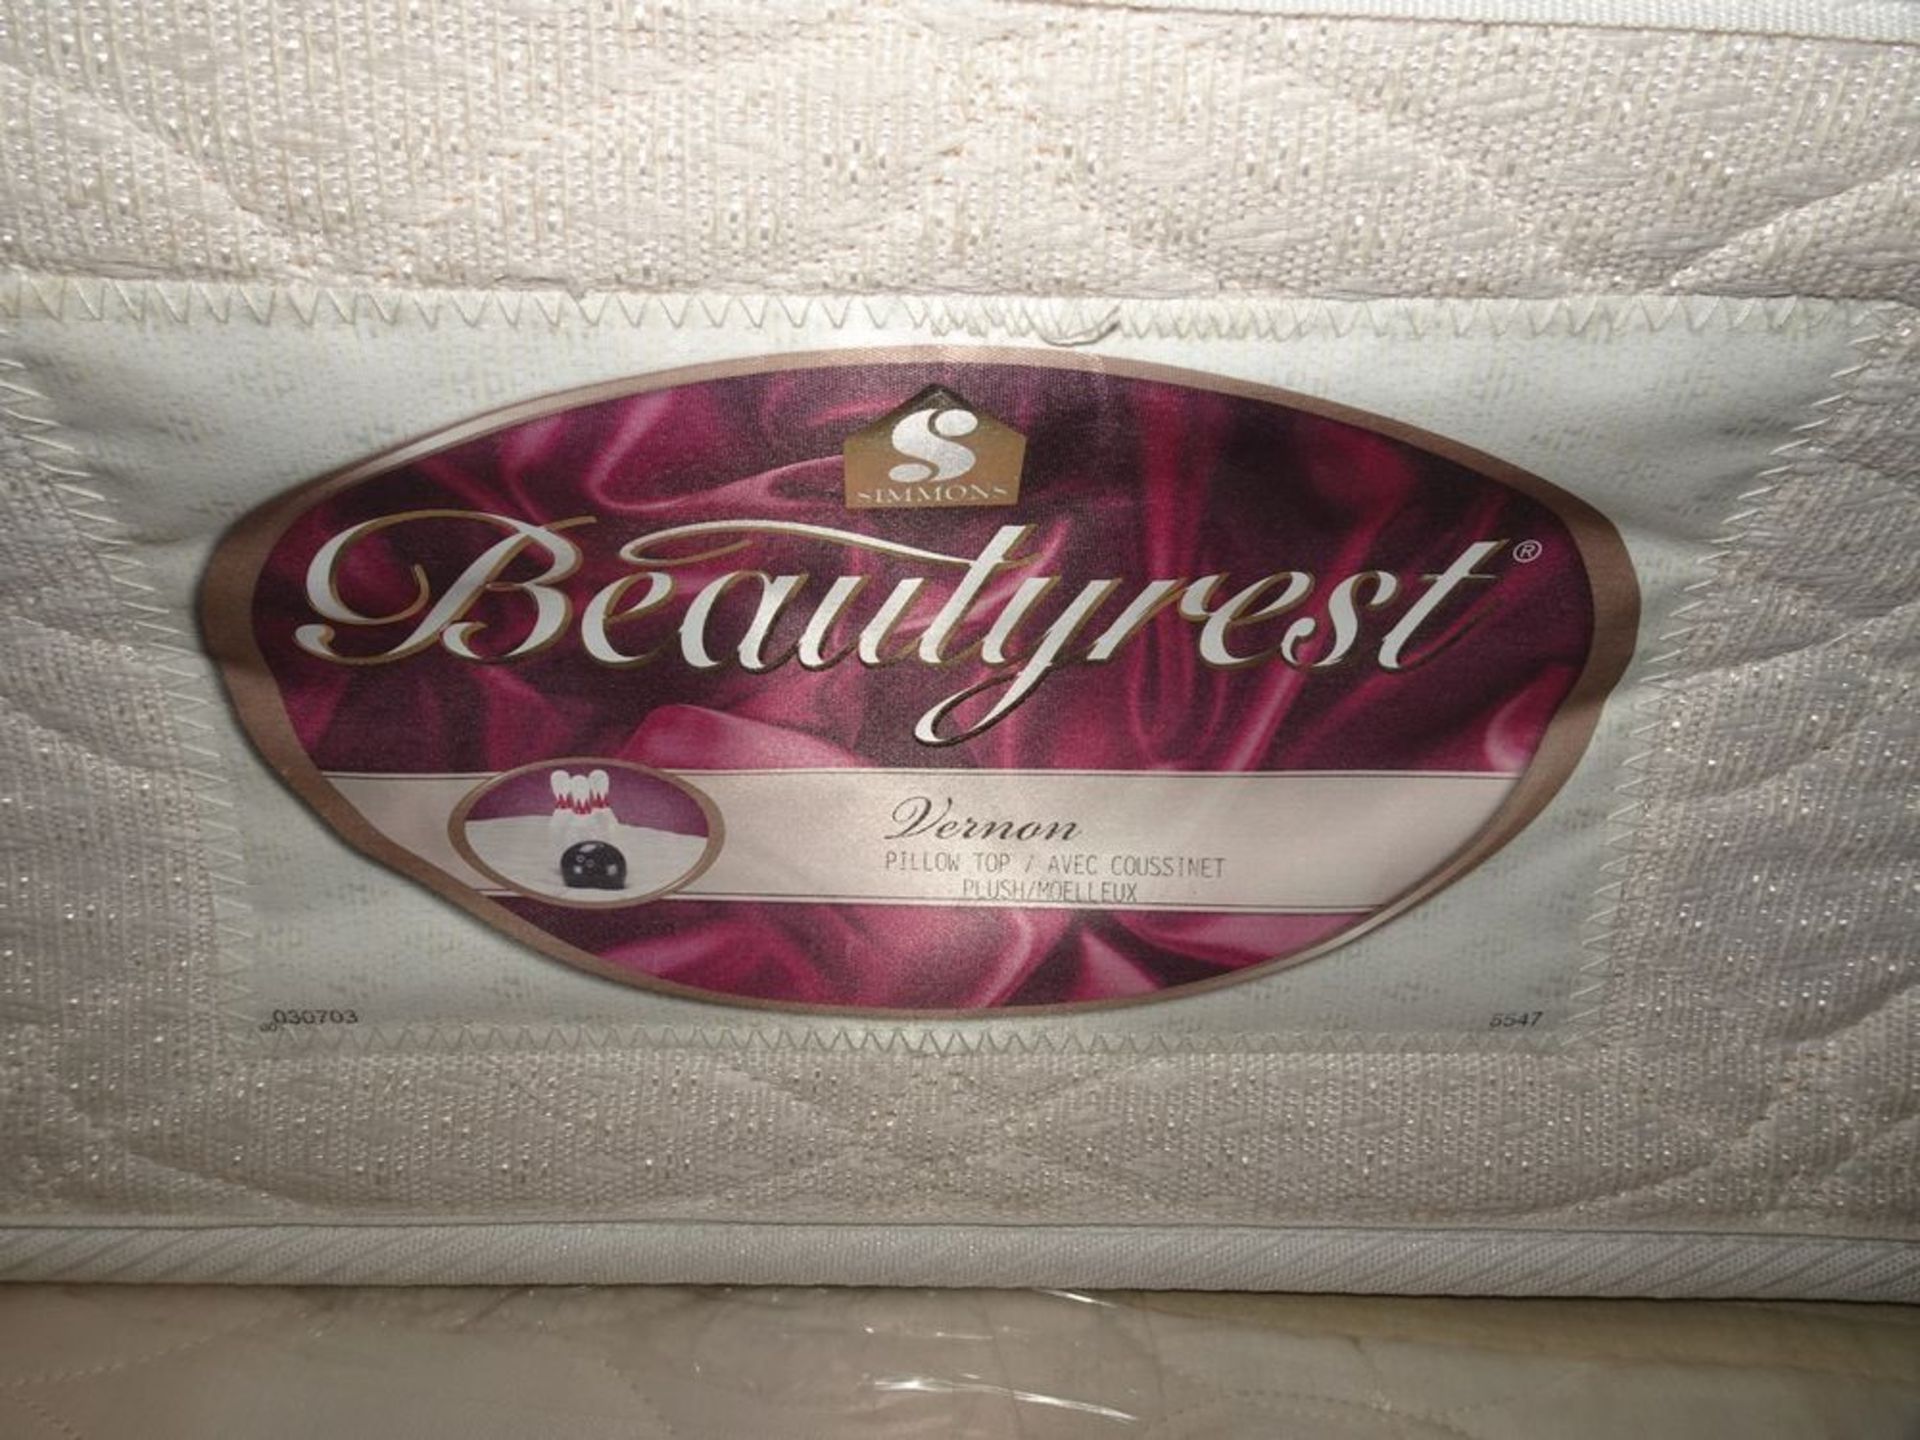 QUEEN SIZE - BEAUTYREST "VERNON" PILLOW TOP W/BOXSPRING - Image 4 of 5